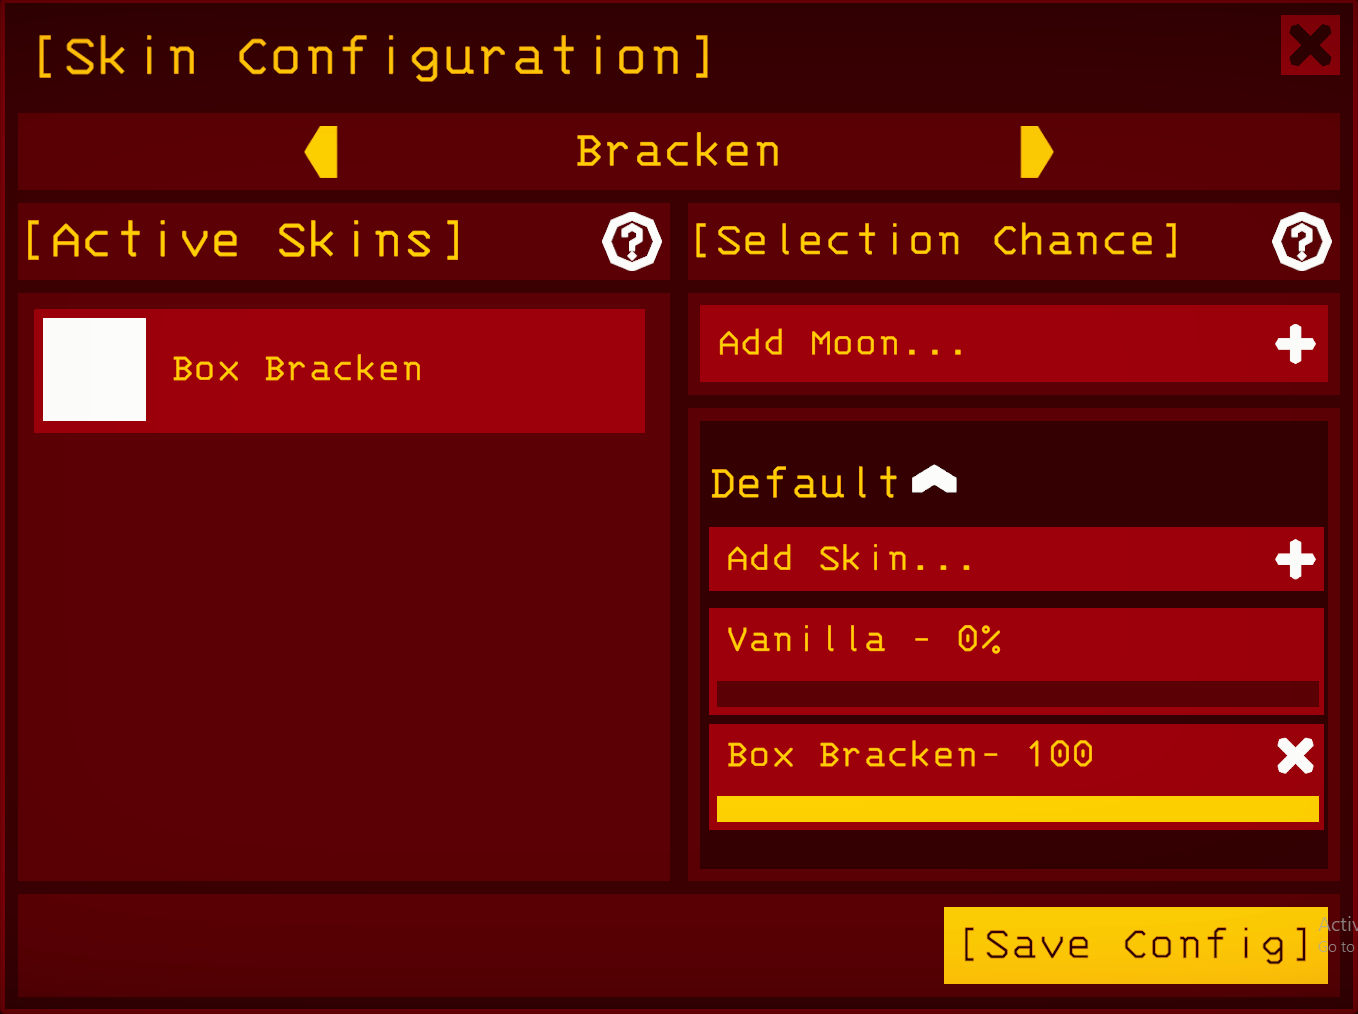 The skin configuration menu as it appears in the Lethal Company GUI